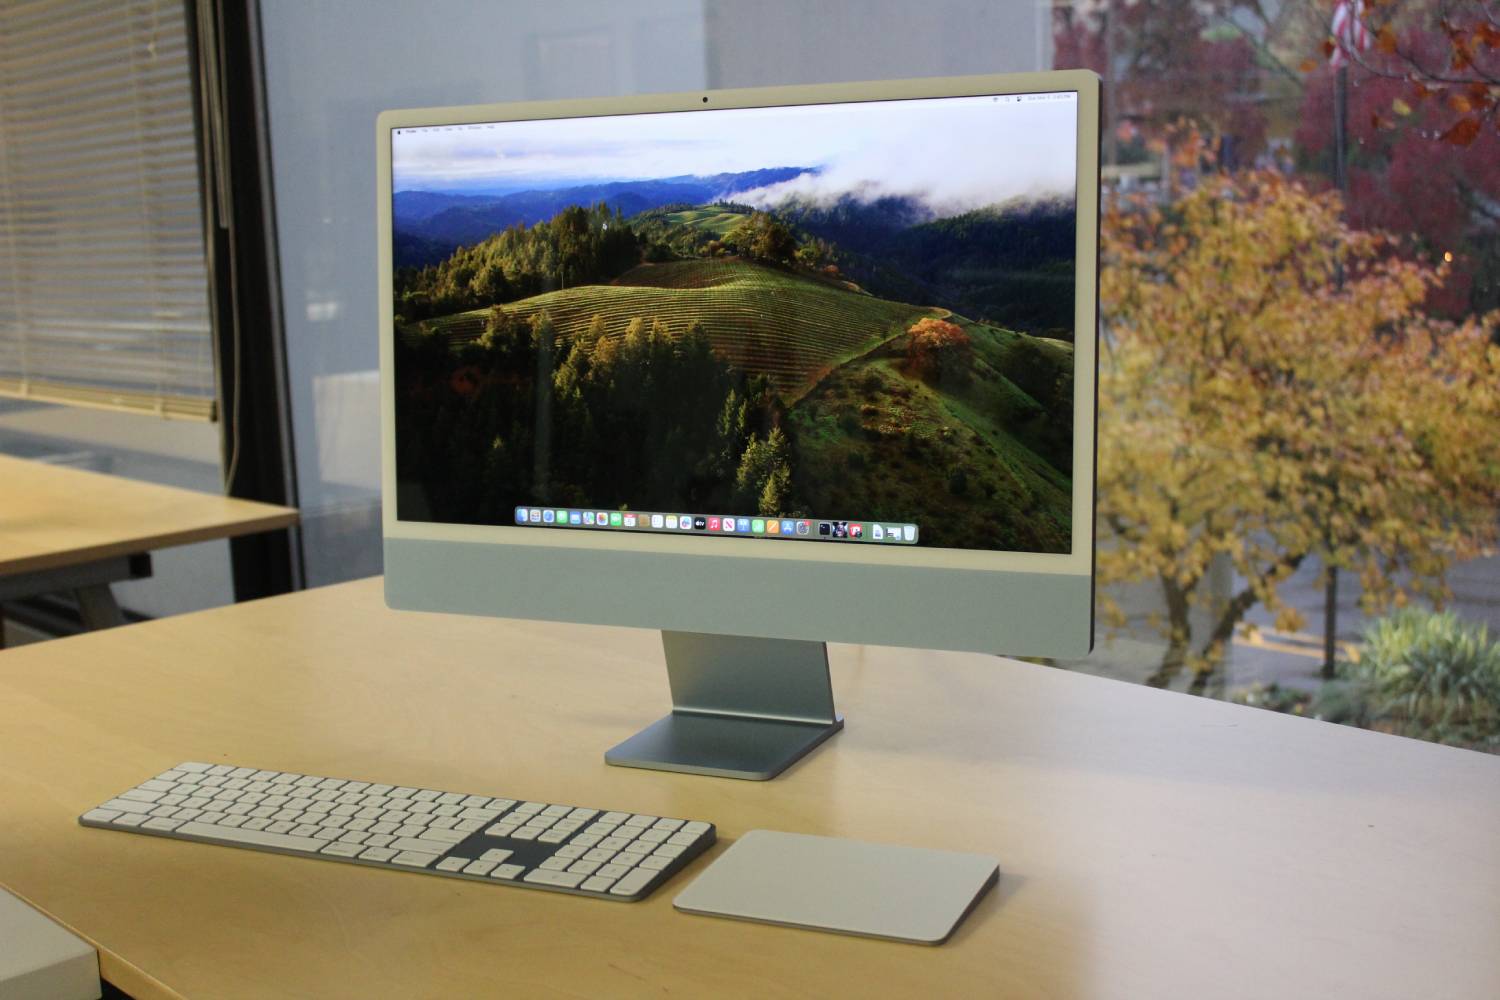 How to buy and configure a new iMac without wasting money